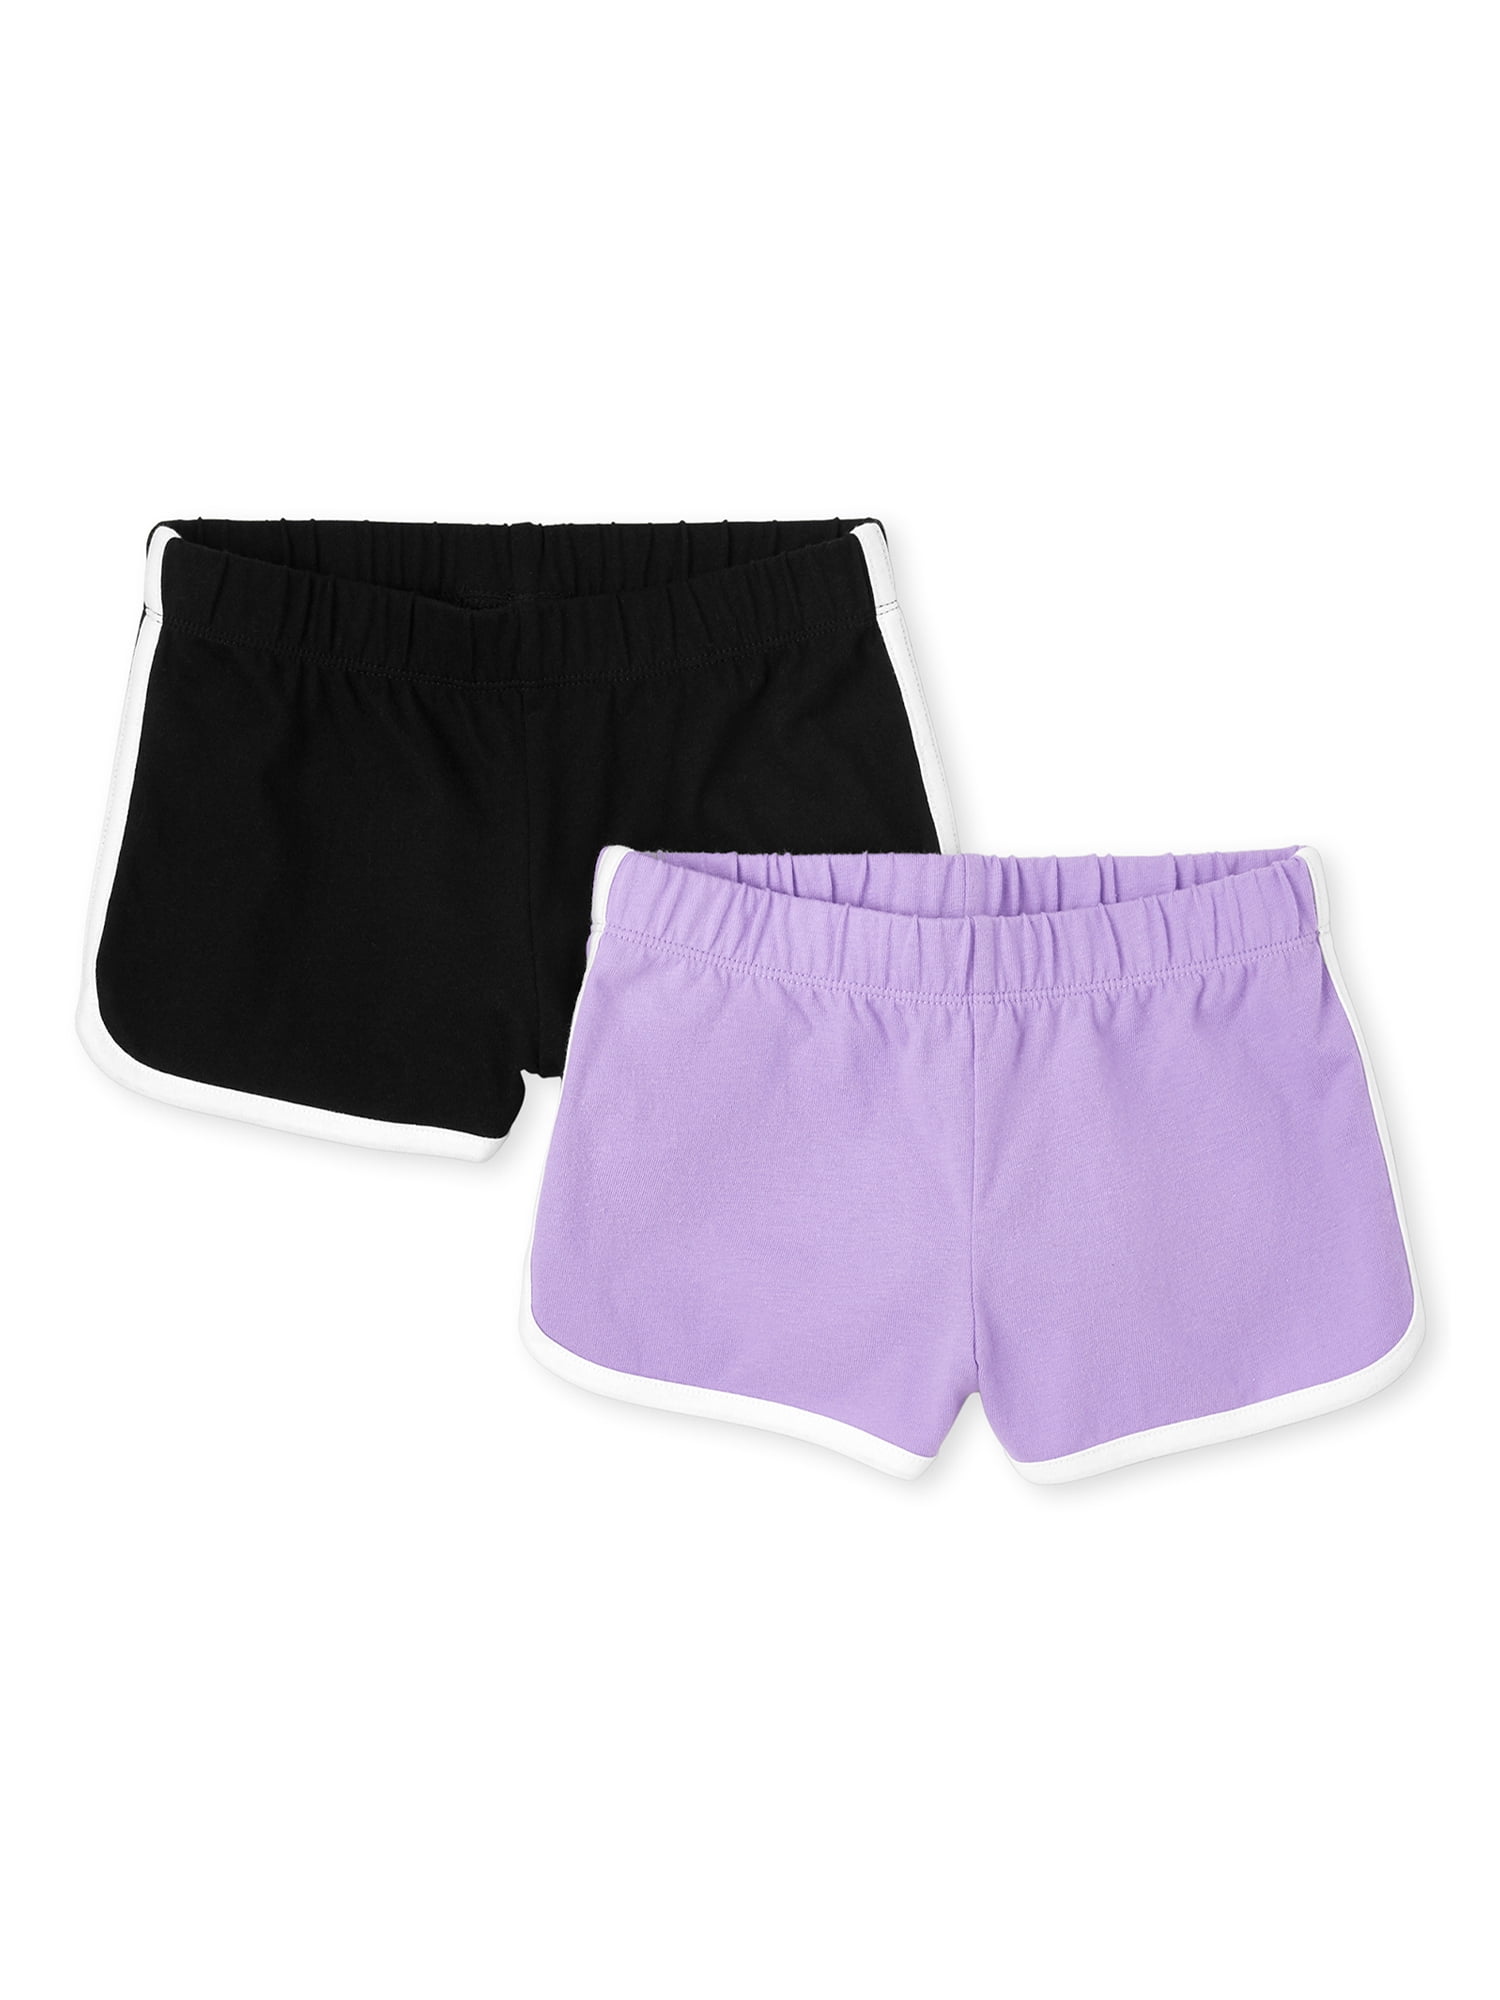 The Children's Place Girls Dolphin Shorts, 2-Pack , Sizes 5-16 ...